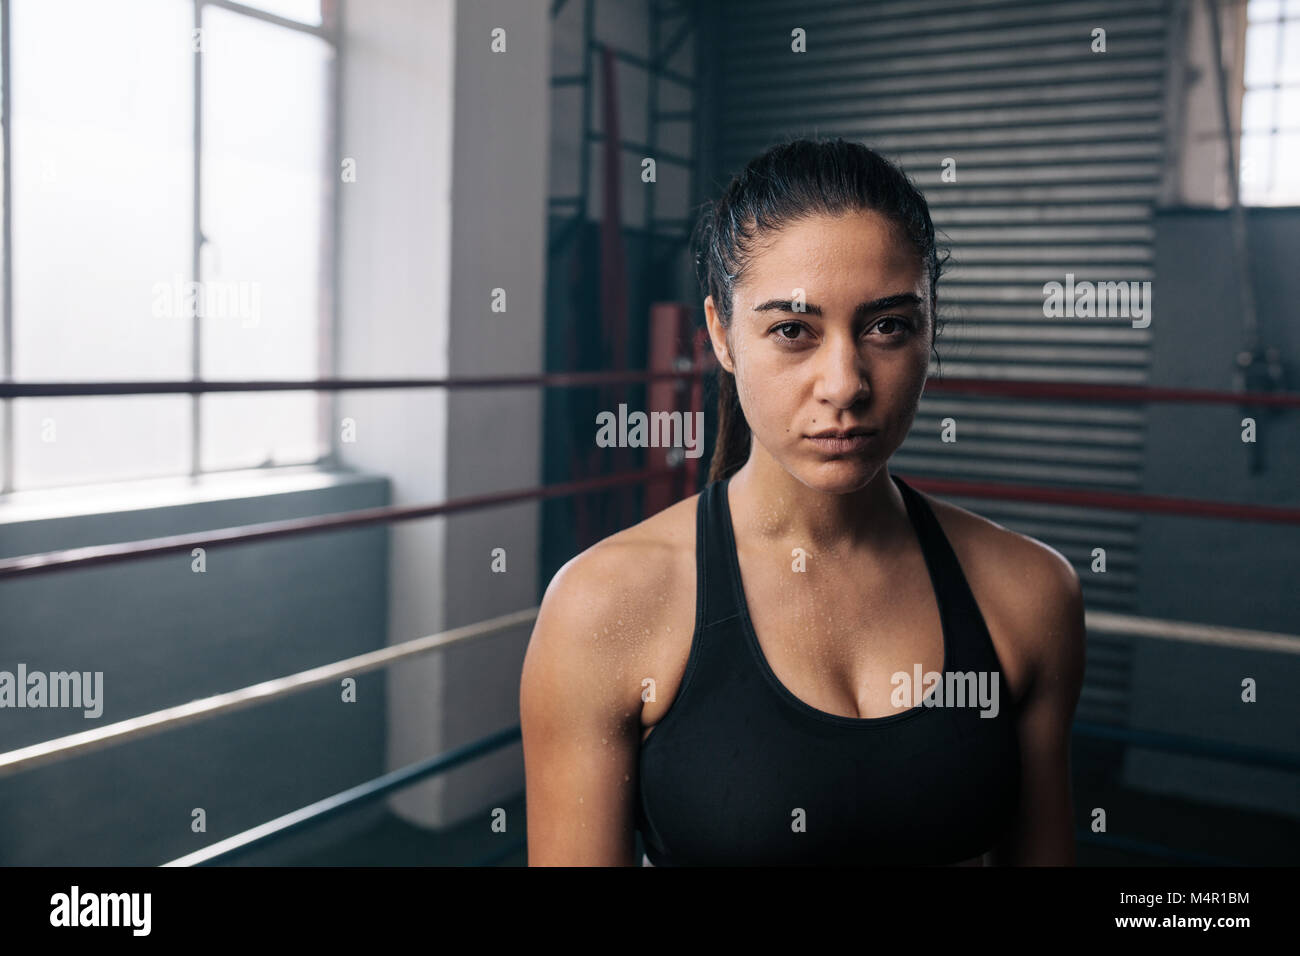 Female boxer inside a boxing ring. Woman boxer at a boxing studio. Stock Photo